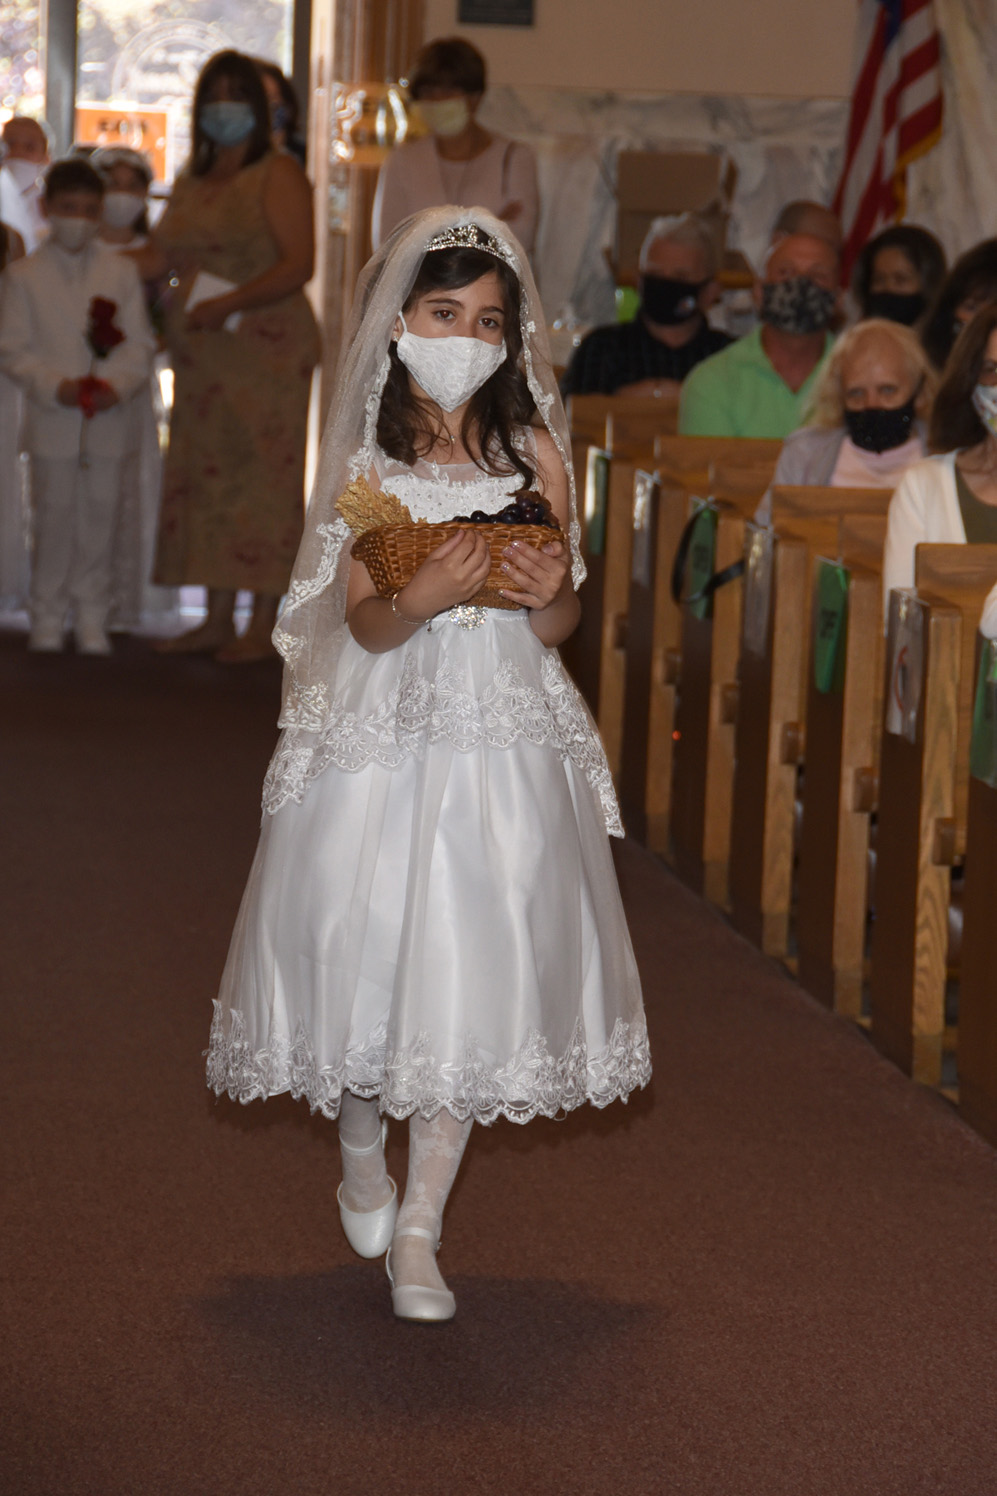 FIRST-COMMUNION-MAY-16-2021-76